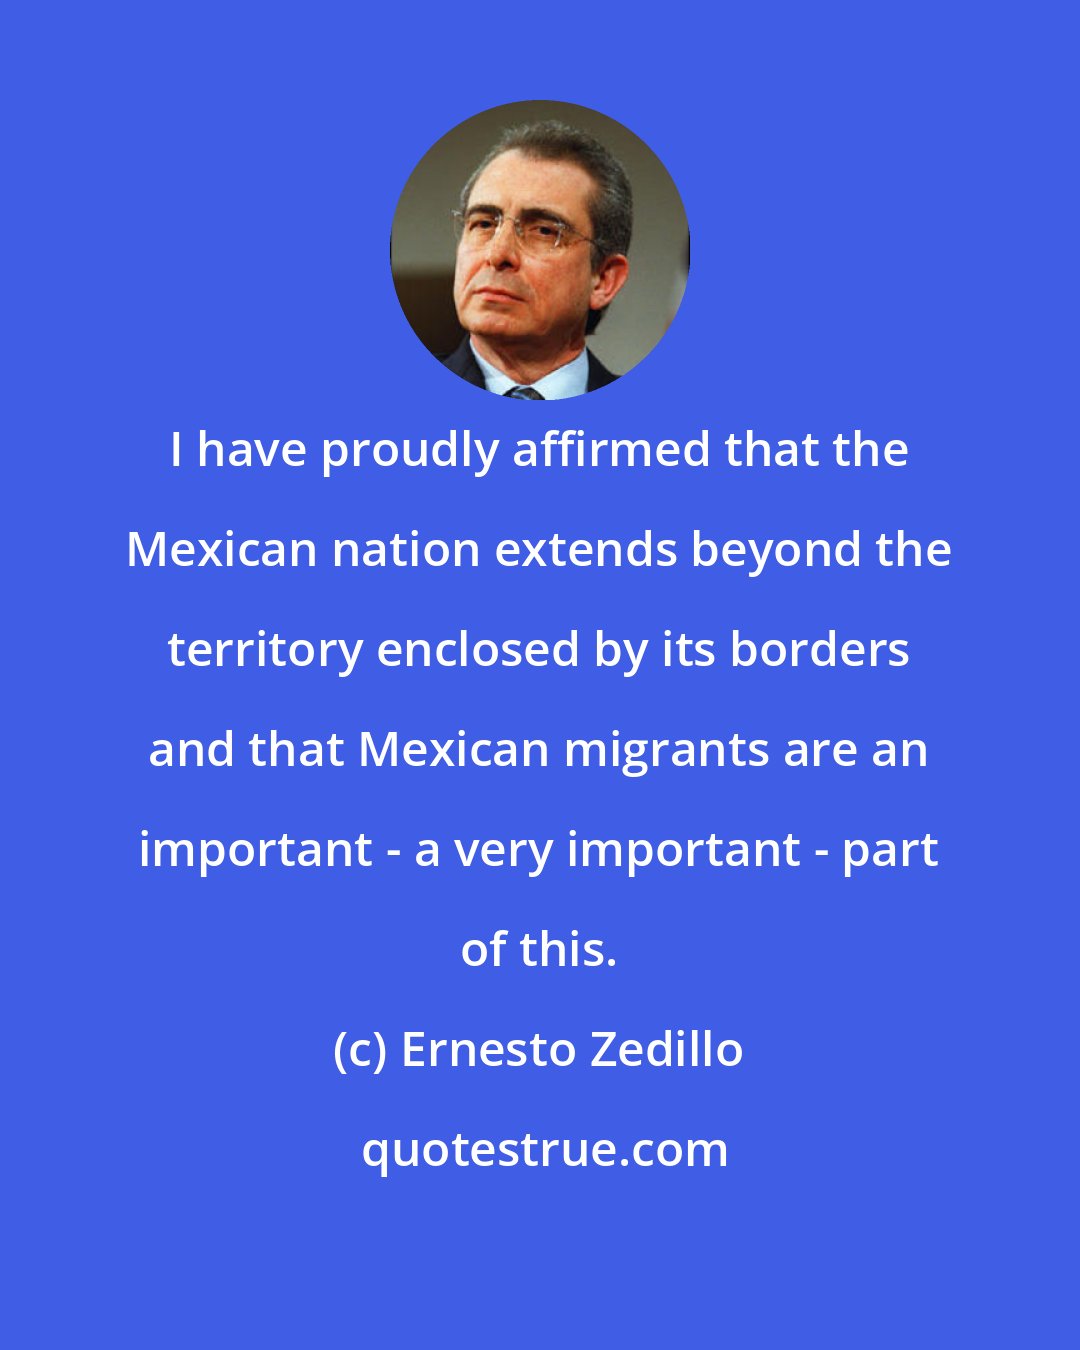 Ernesto Zedillo: I have proudly affirmed that the Mexican nation extends beyond the territory enclosed by its borders and that Mexican migrants are an important - a very important - part of this.